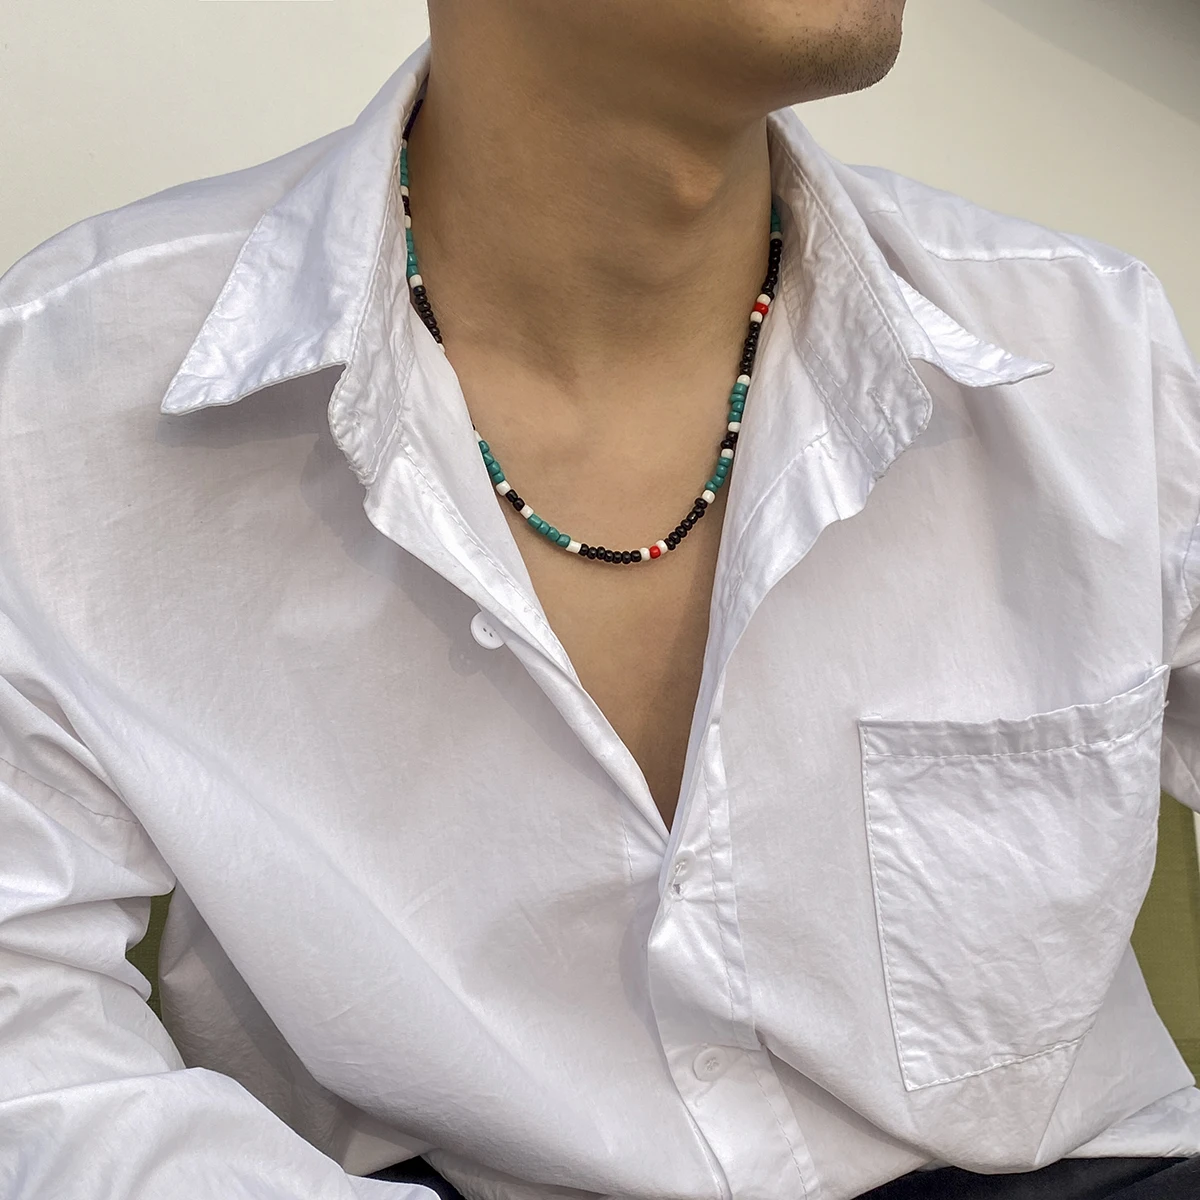 

Kpop Minimalism Seed Beads Short Clavicle Chain Choker Necklace For Men Hand-woven Beaded Collar Bohemia Accessories Jewelry New